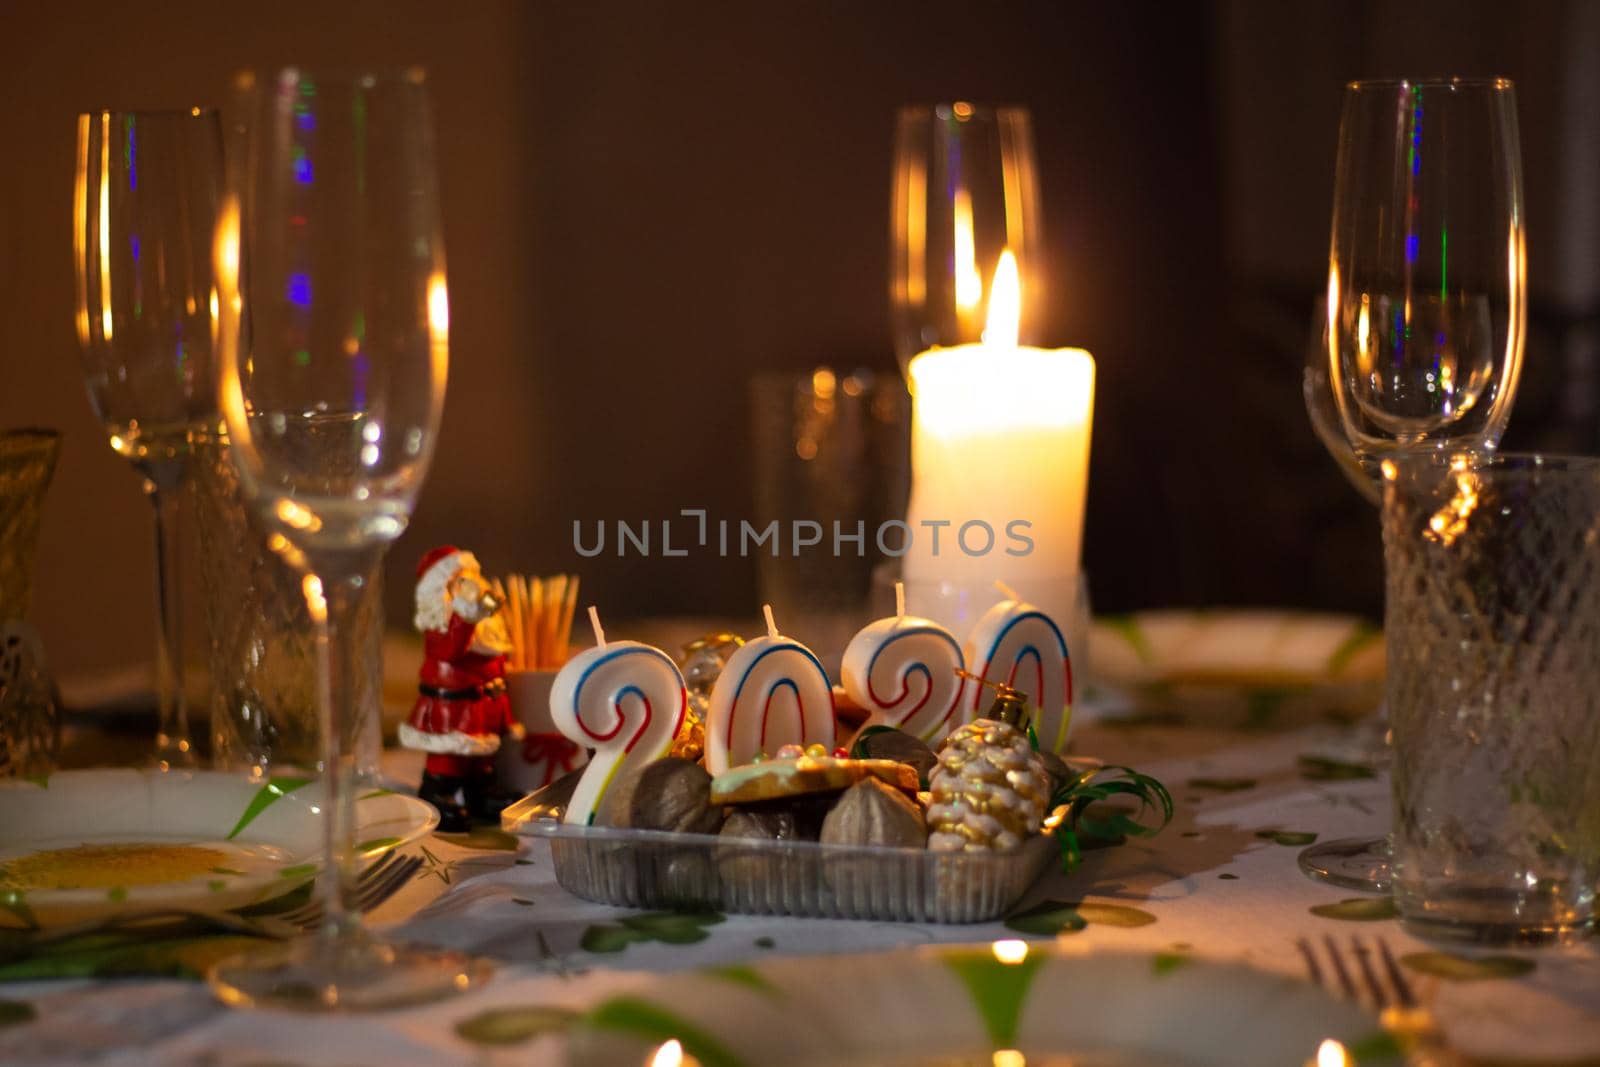 Christmas table with utensils and glasses, a table with burning candles, in a dark room